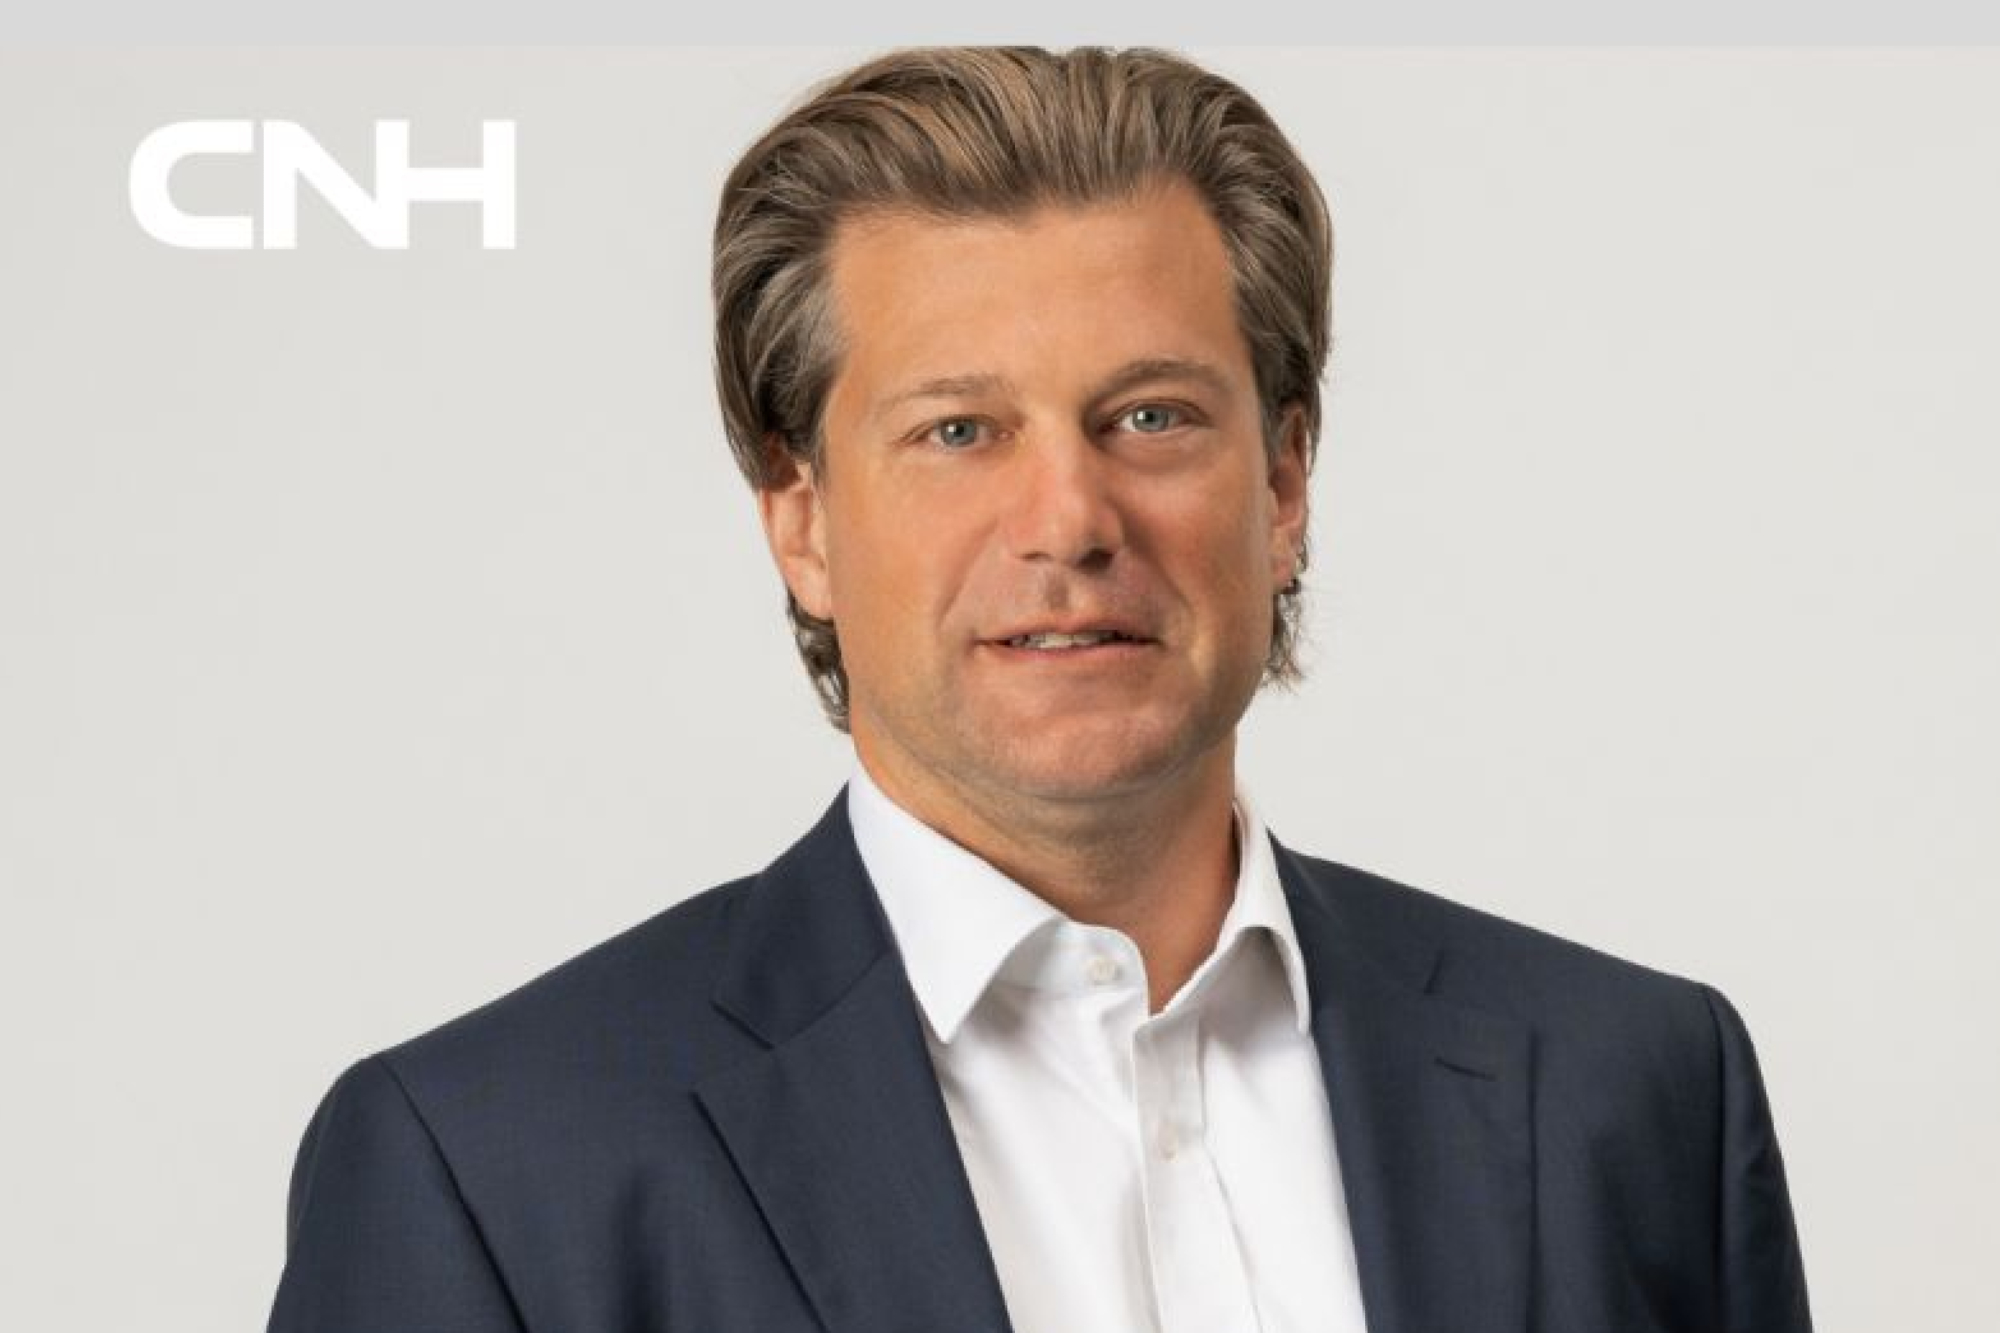 Gerrit Marx to lead CNH Industrial as CEO